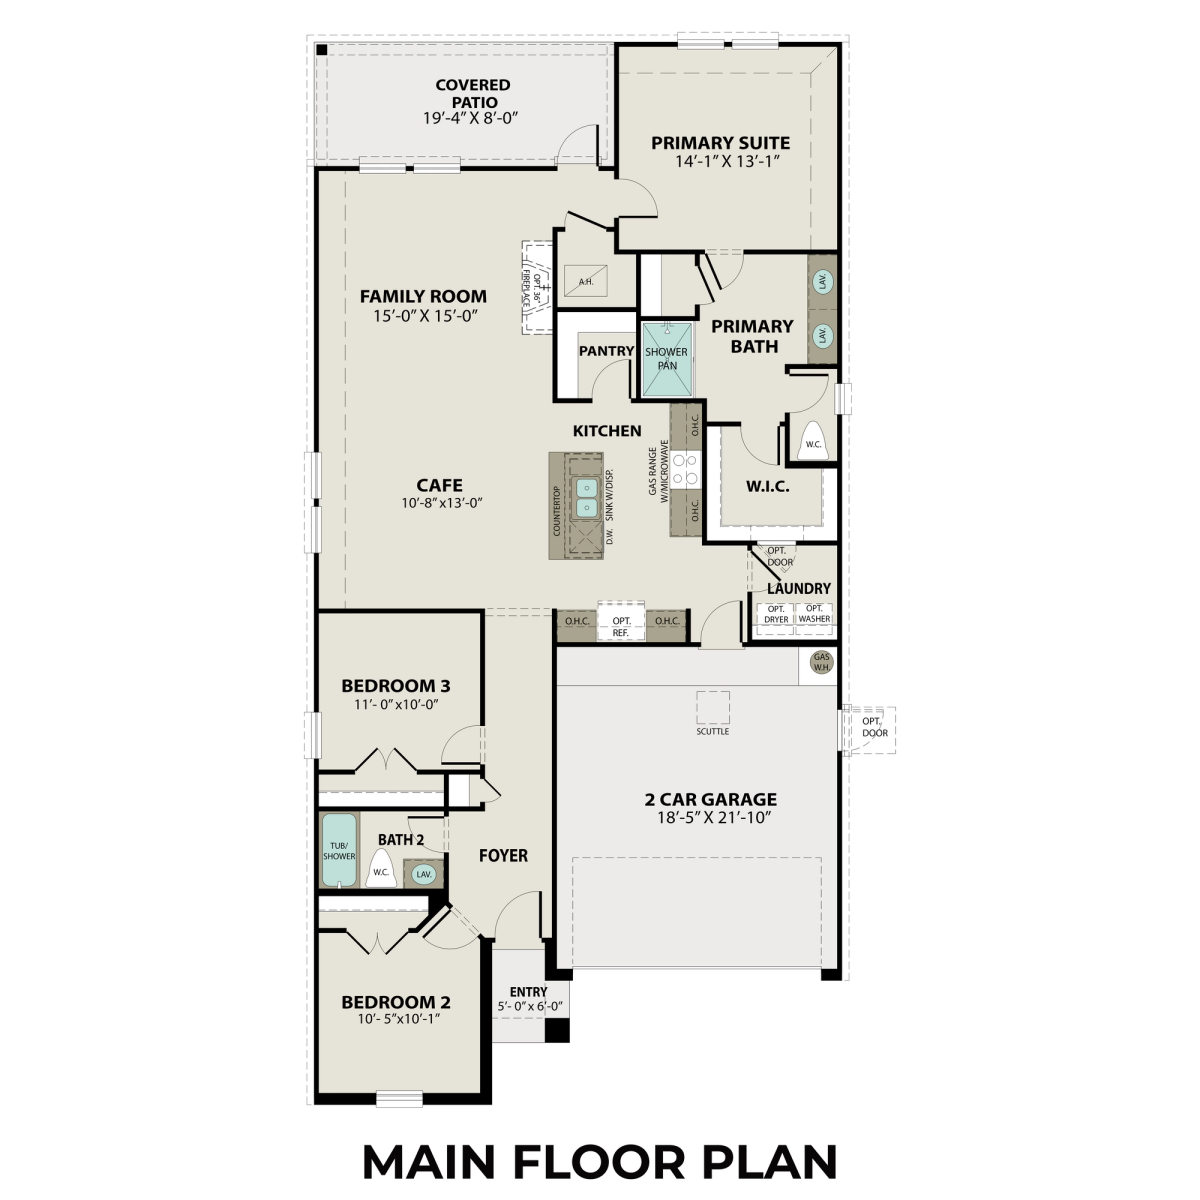 1 - The Laguna A buildable floor plan layout in Davidson Homes' Enclave at Newport community.